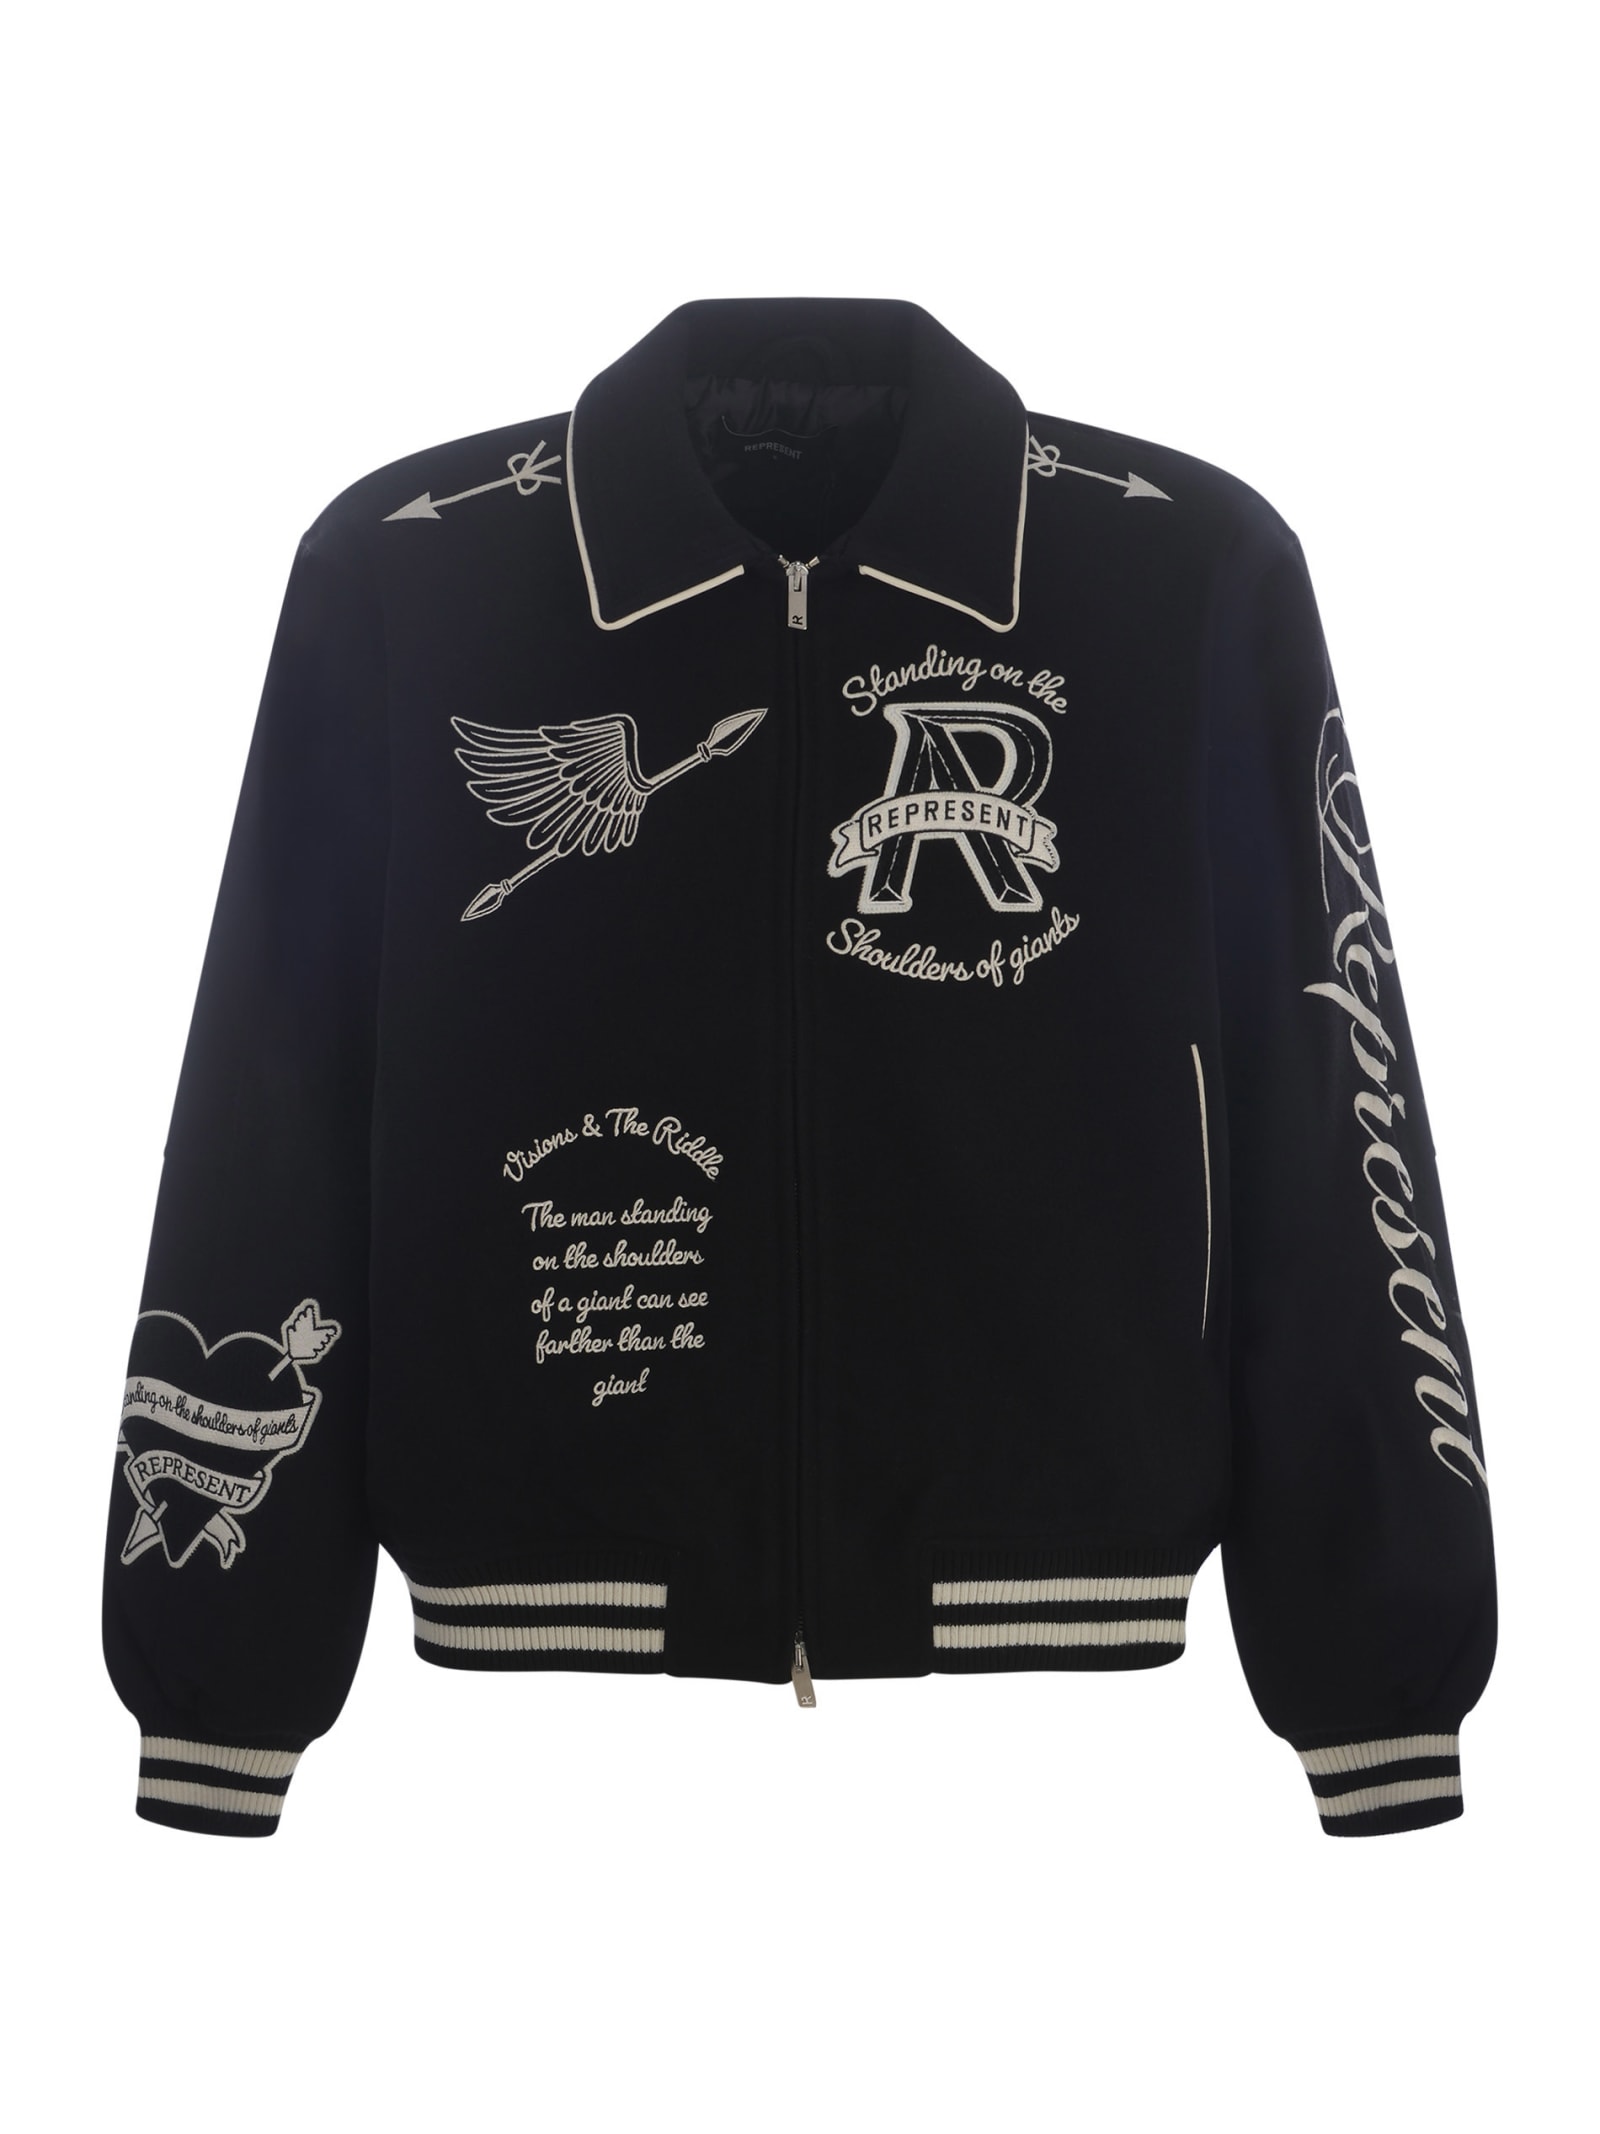 Represent Wool-Blend and Faux Leather Varsity Jacket - S